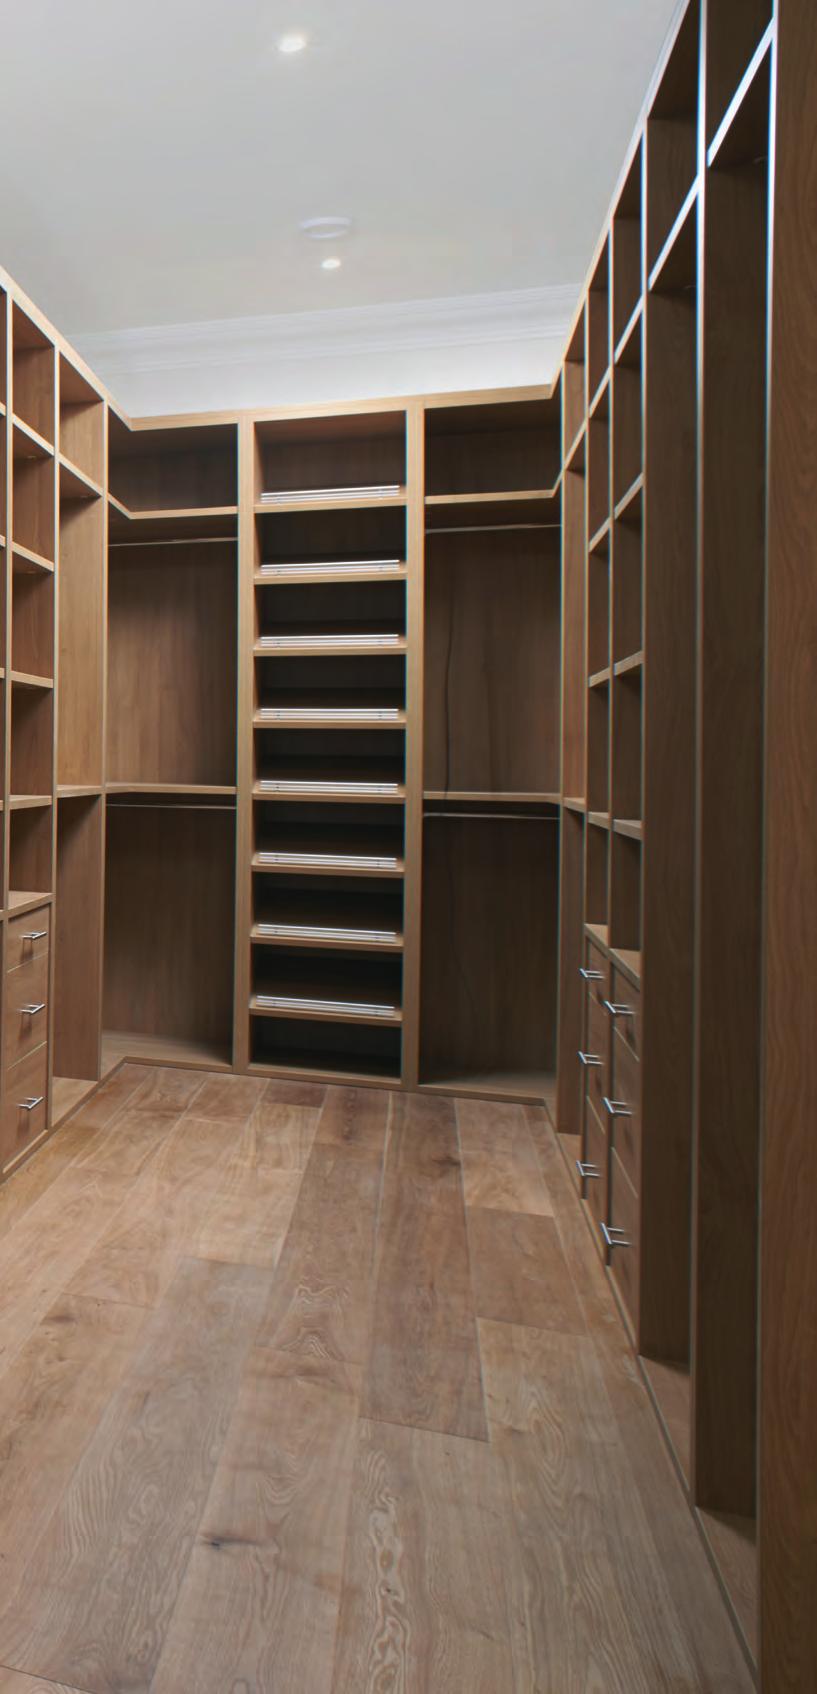 OXFORD WARDROBE AND DRESSING ROOM INTERIORS This timeless bespoke interior is suitable either for walk-in wardrobes or conventional wardrobes behind doors.